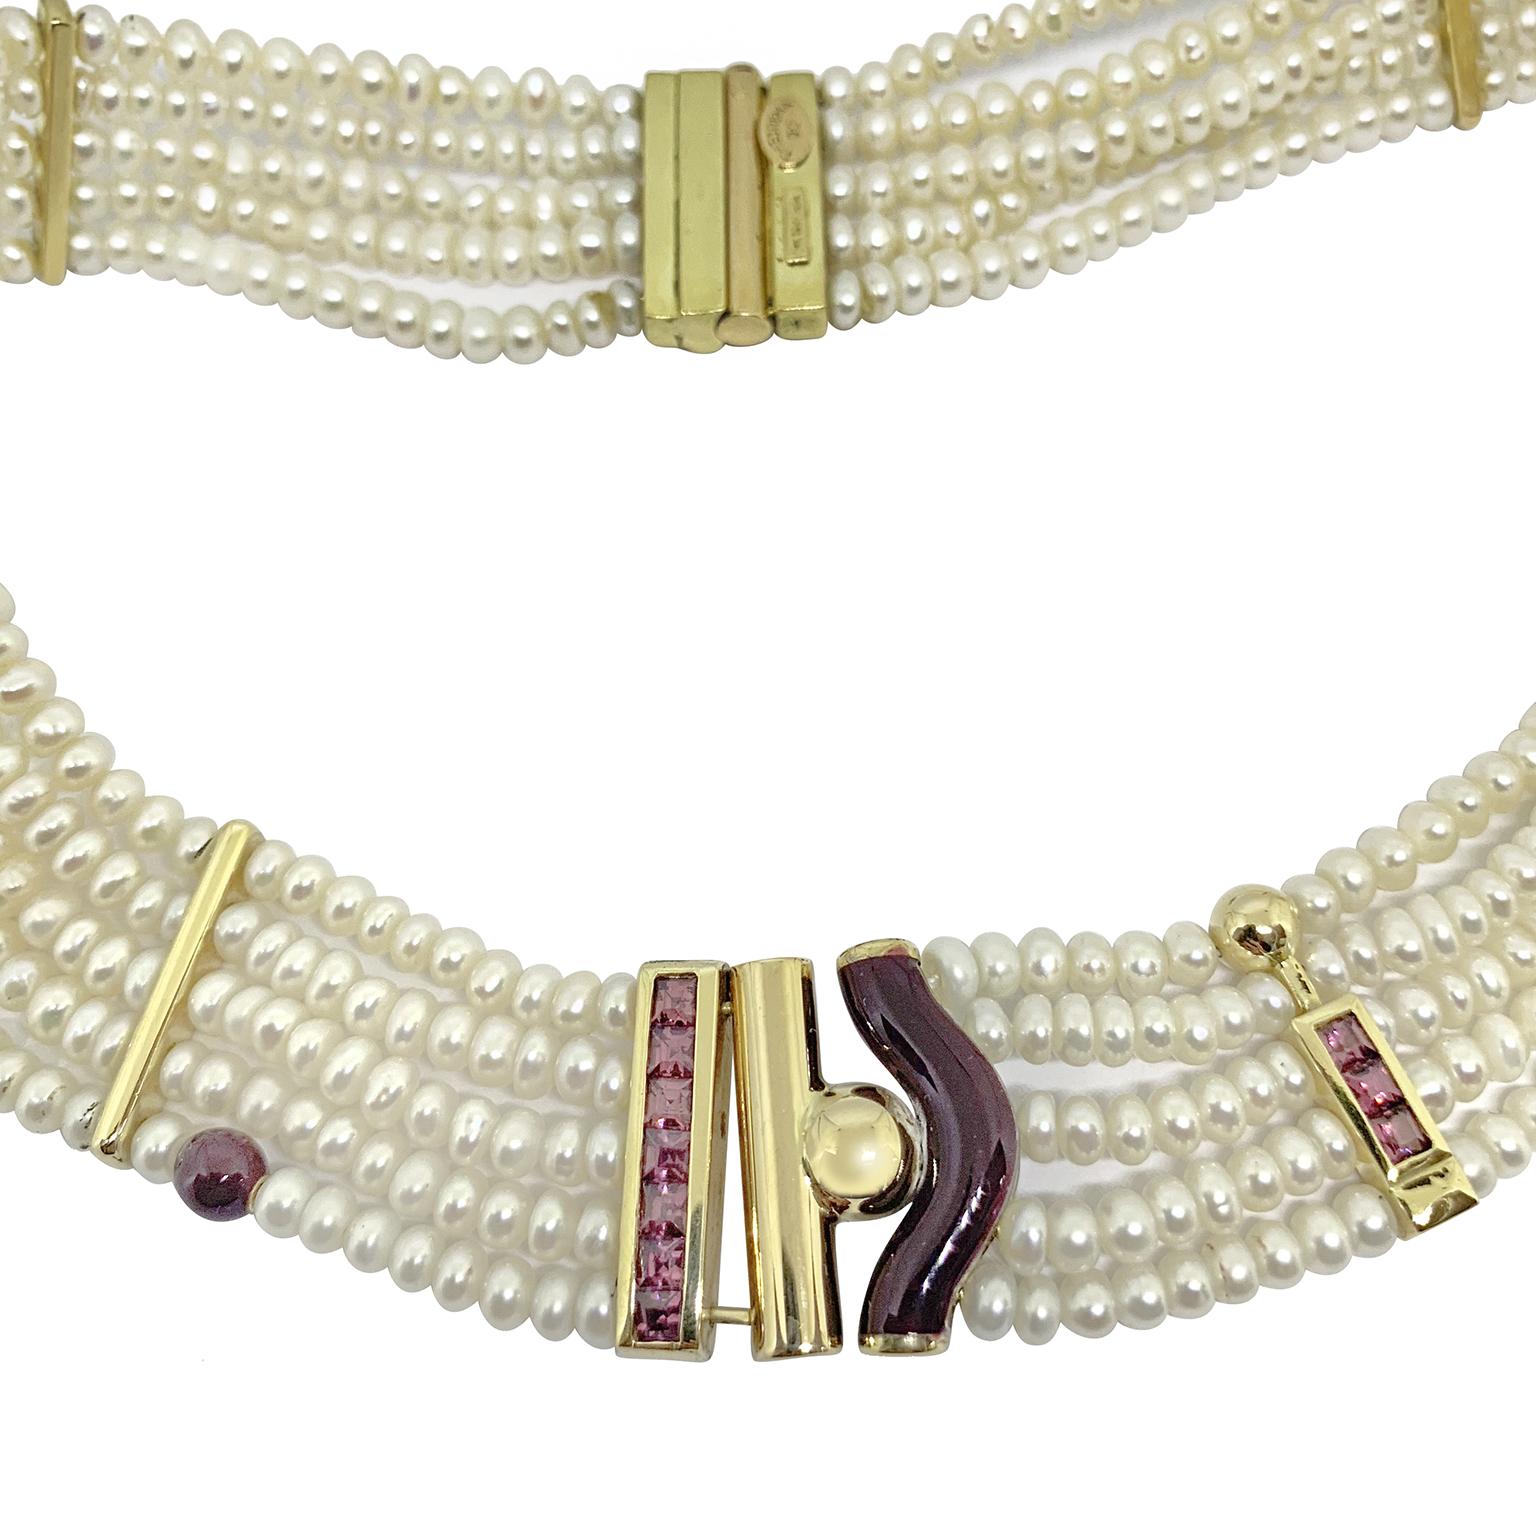 La nouvelle baugue necklace in Japanese pearls 18 kt gold and silver, red enameled whit pink tormaline


Matching bracelet available